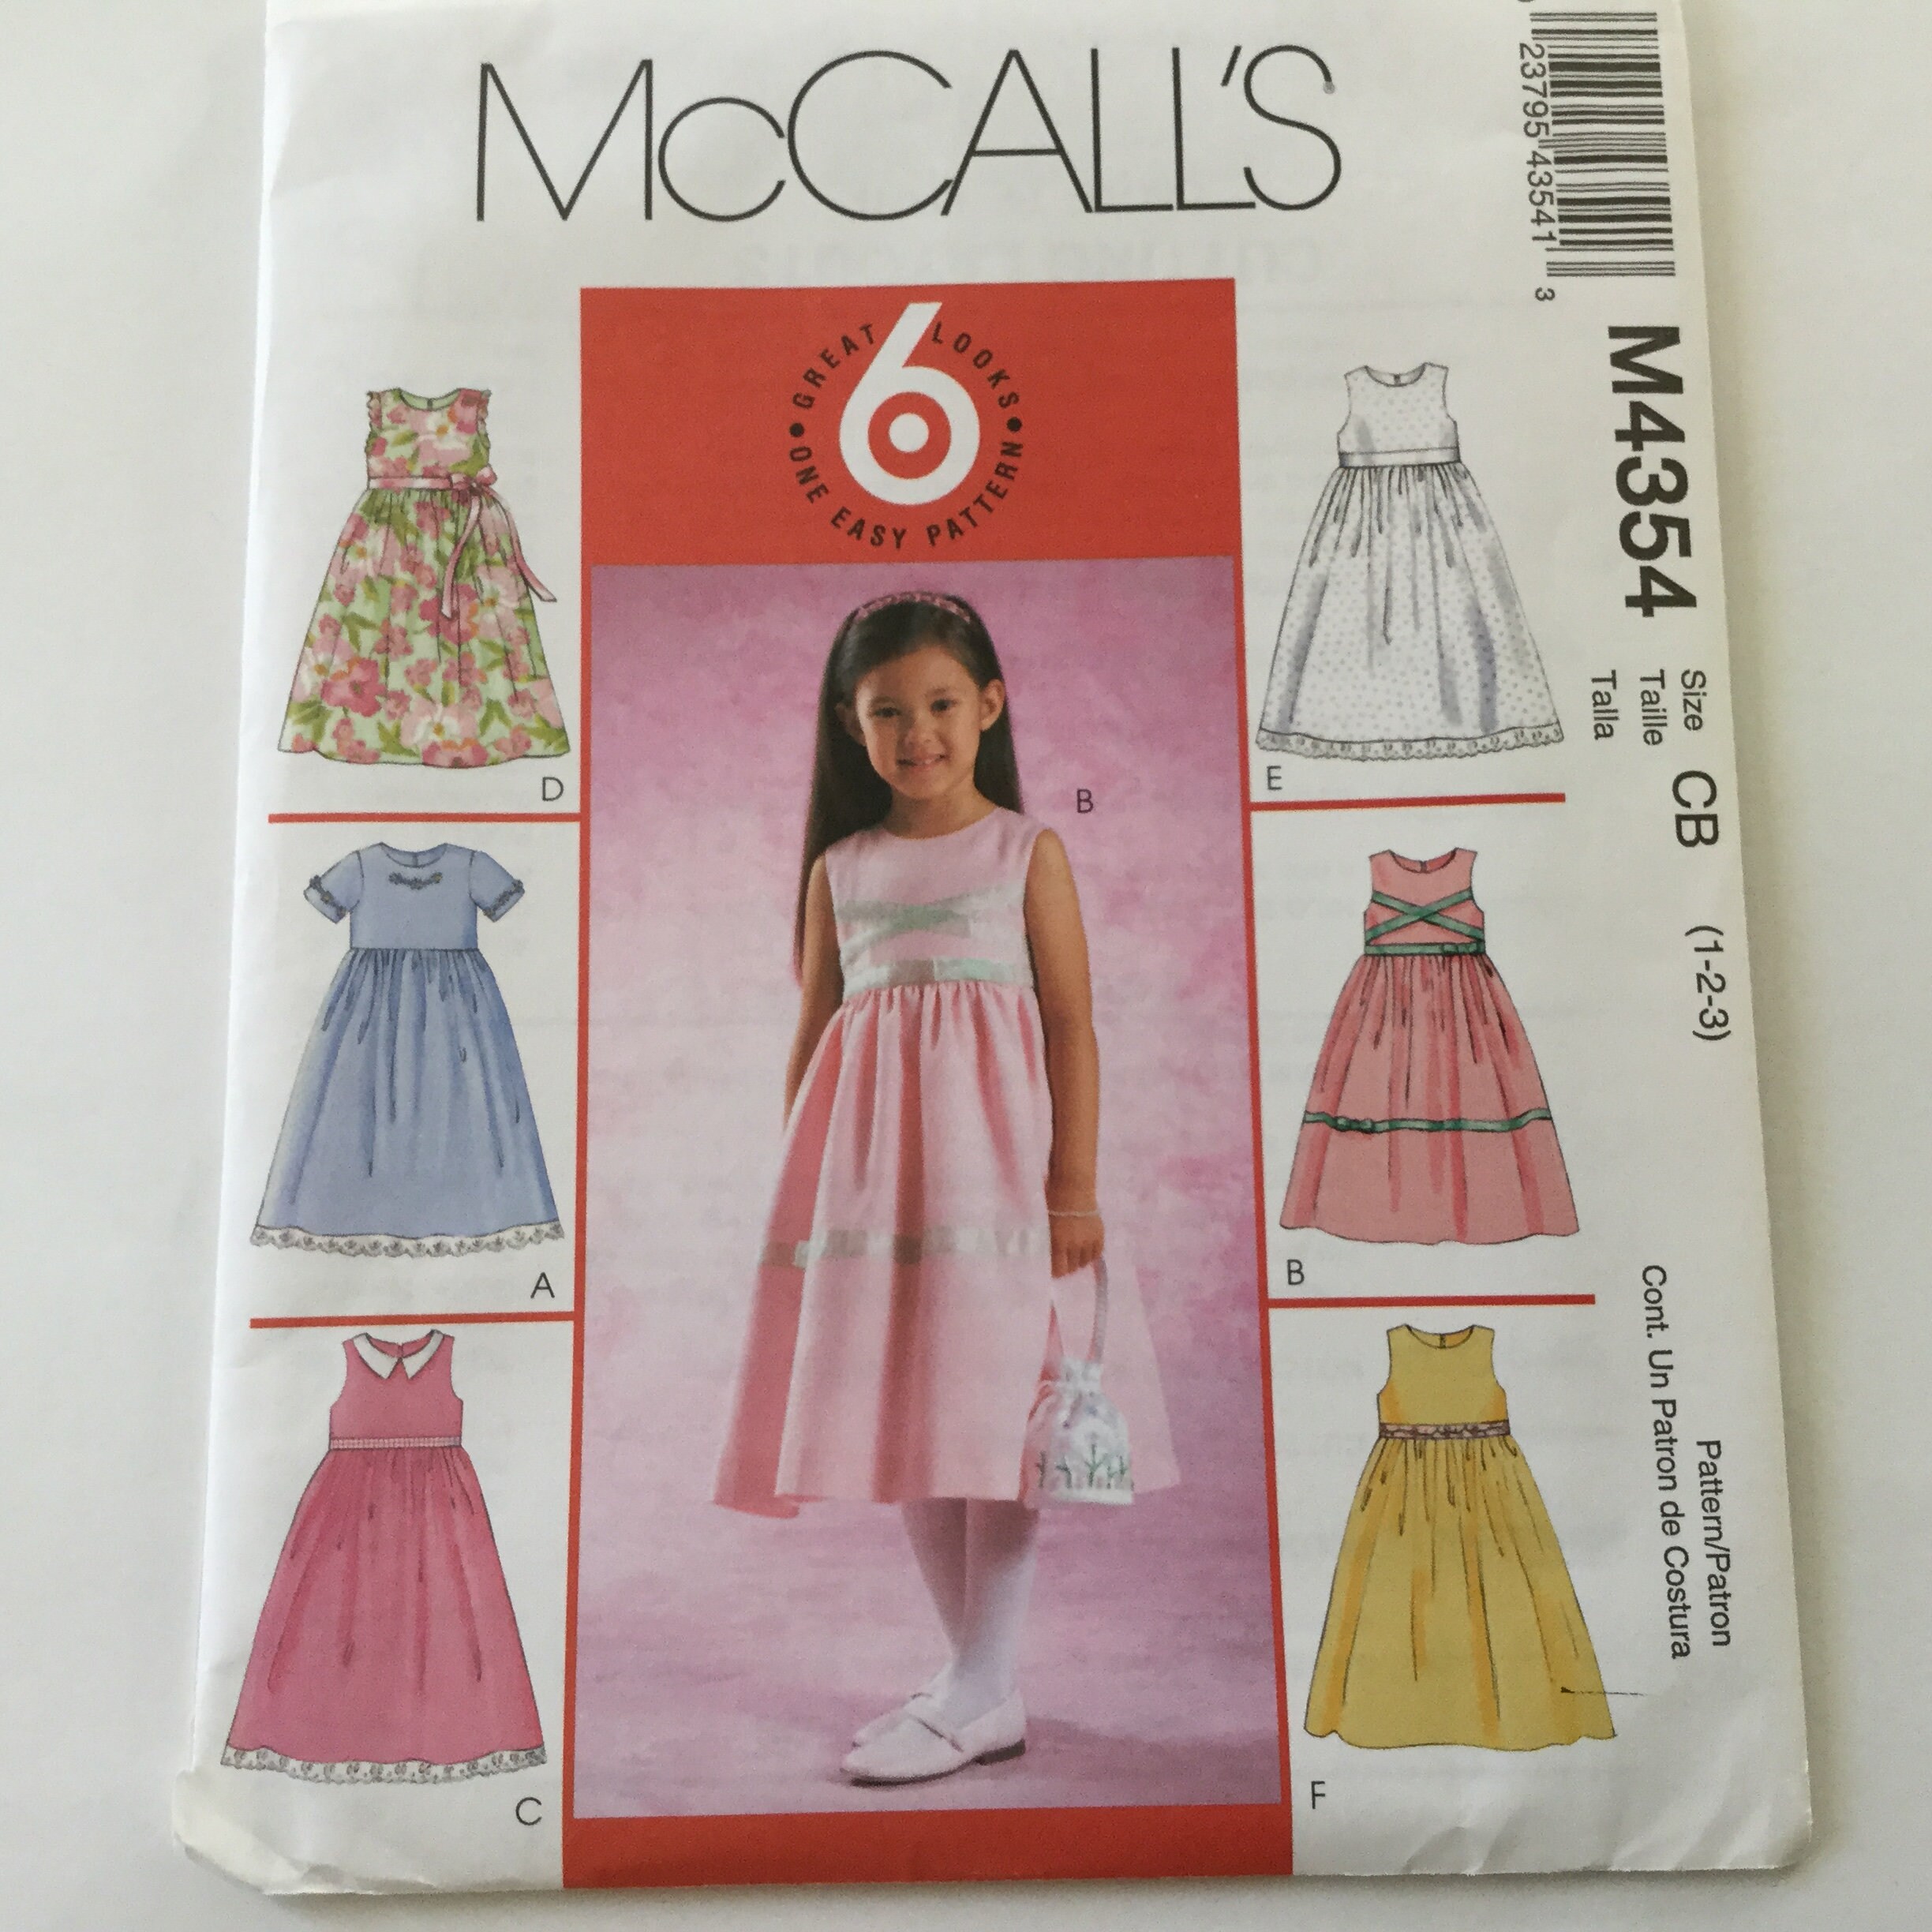 McCall\u2019s 3874 Sewing Patterns Uncut Girl Child Dress Dresses Sewing Size CF 4-5-6 Easy Kids Cloths Cardigan Girls Party Birthday Dresses